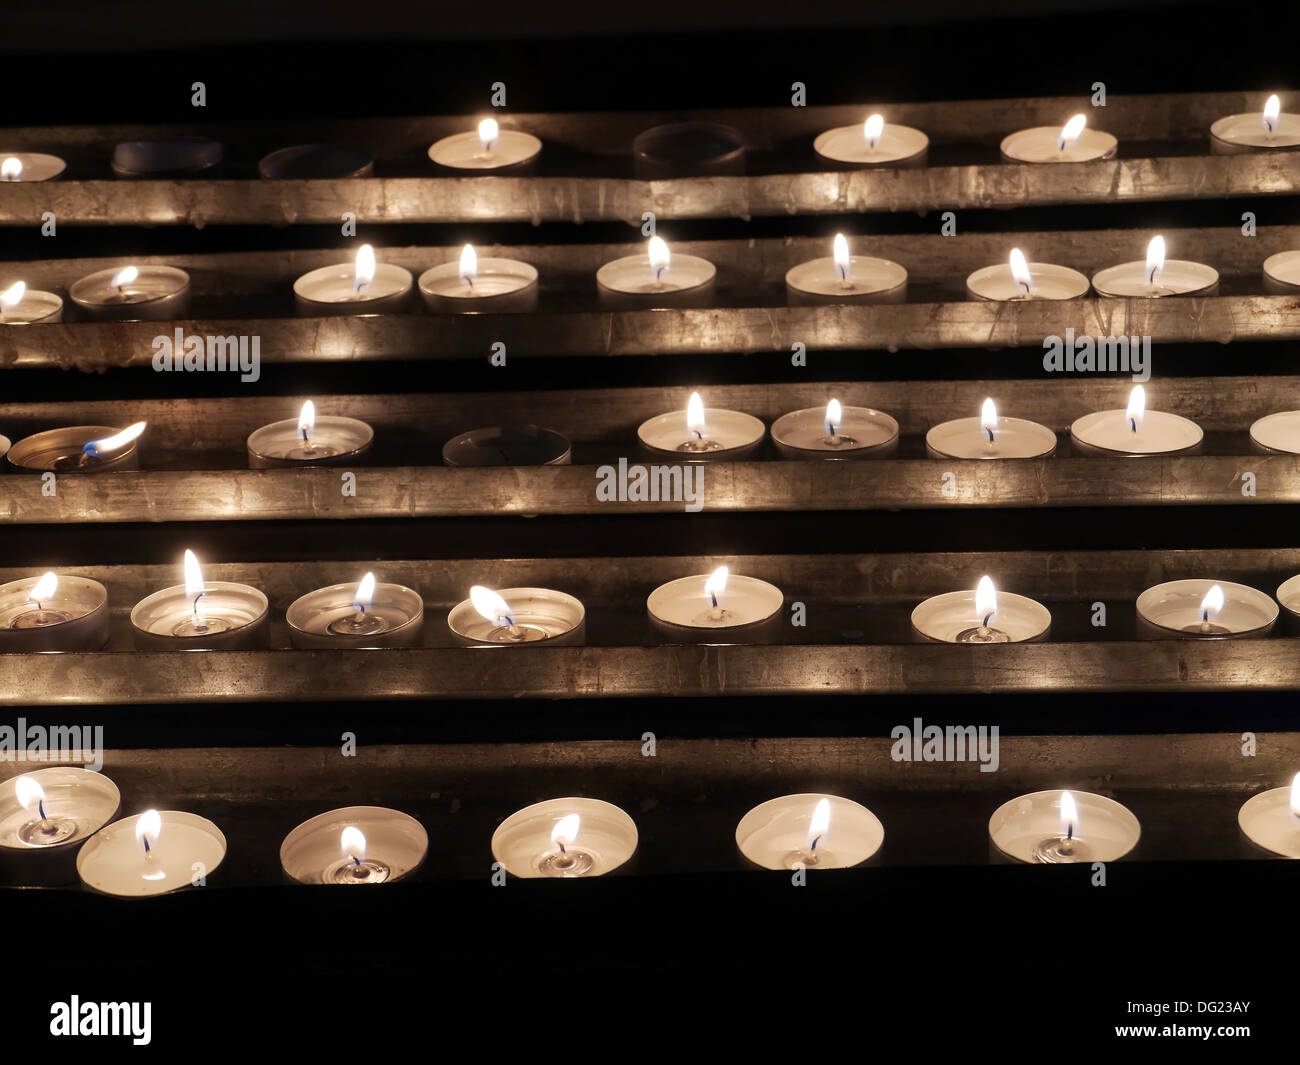 Rows of lit votive candles Stock Photo